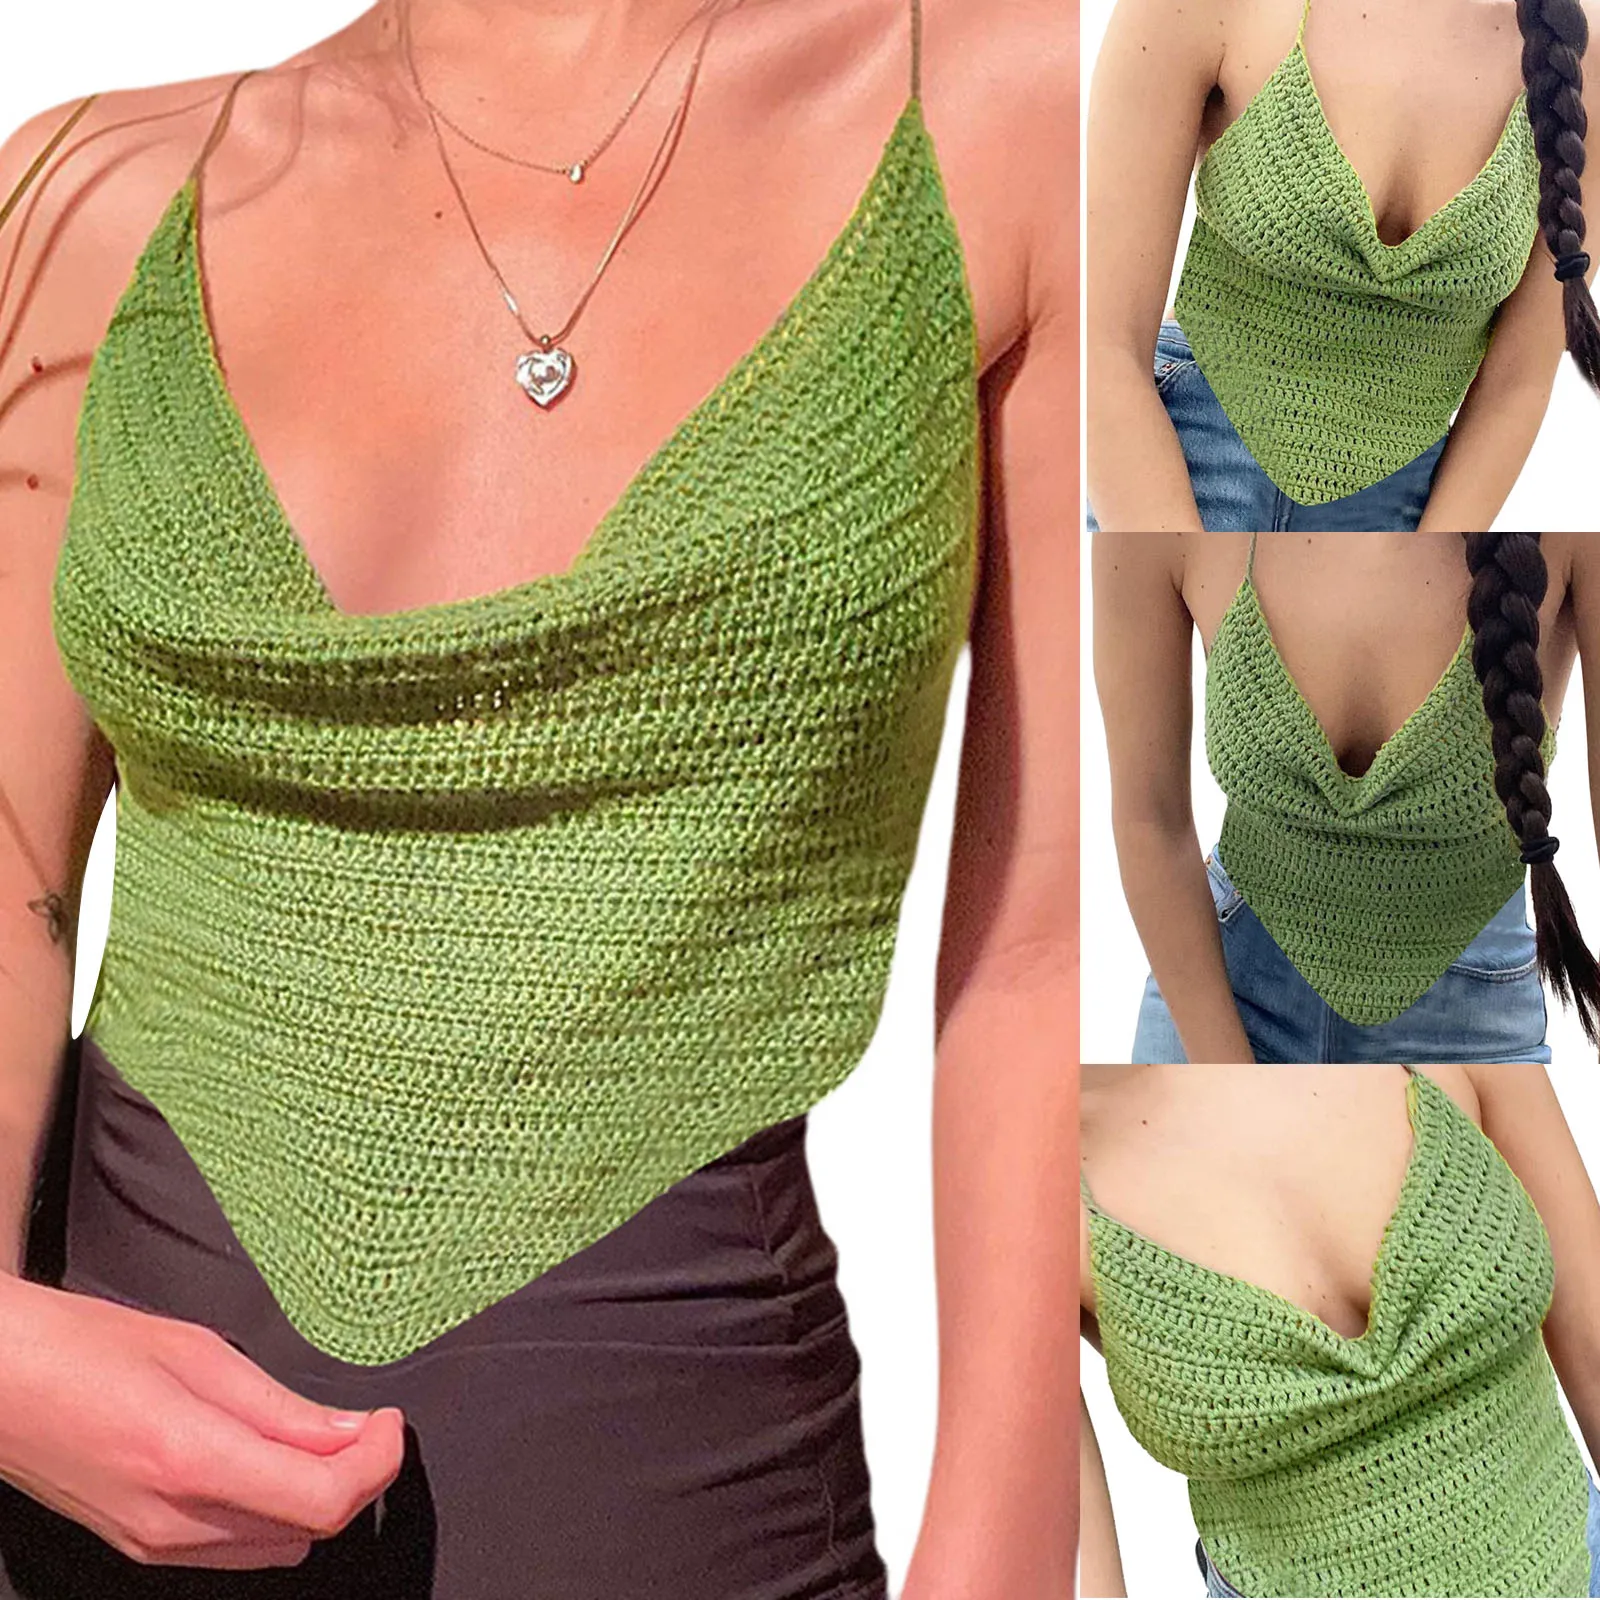 

Womens Chic Sleeveless Cowl Neck Self-Tie Backless Crochet Camisole Halter Crop Cami Tops Green Summer Spring Fall Comfortable